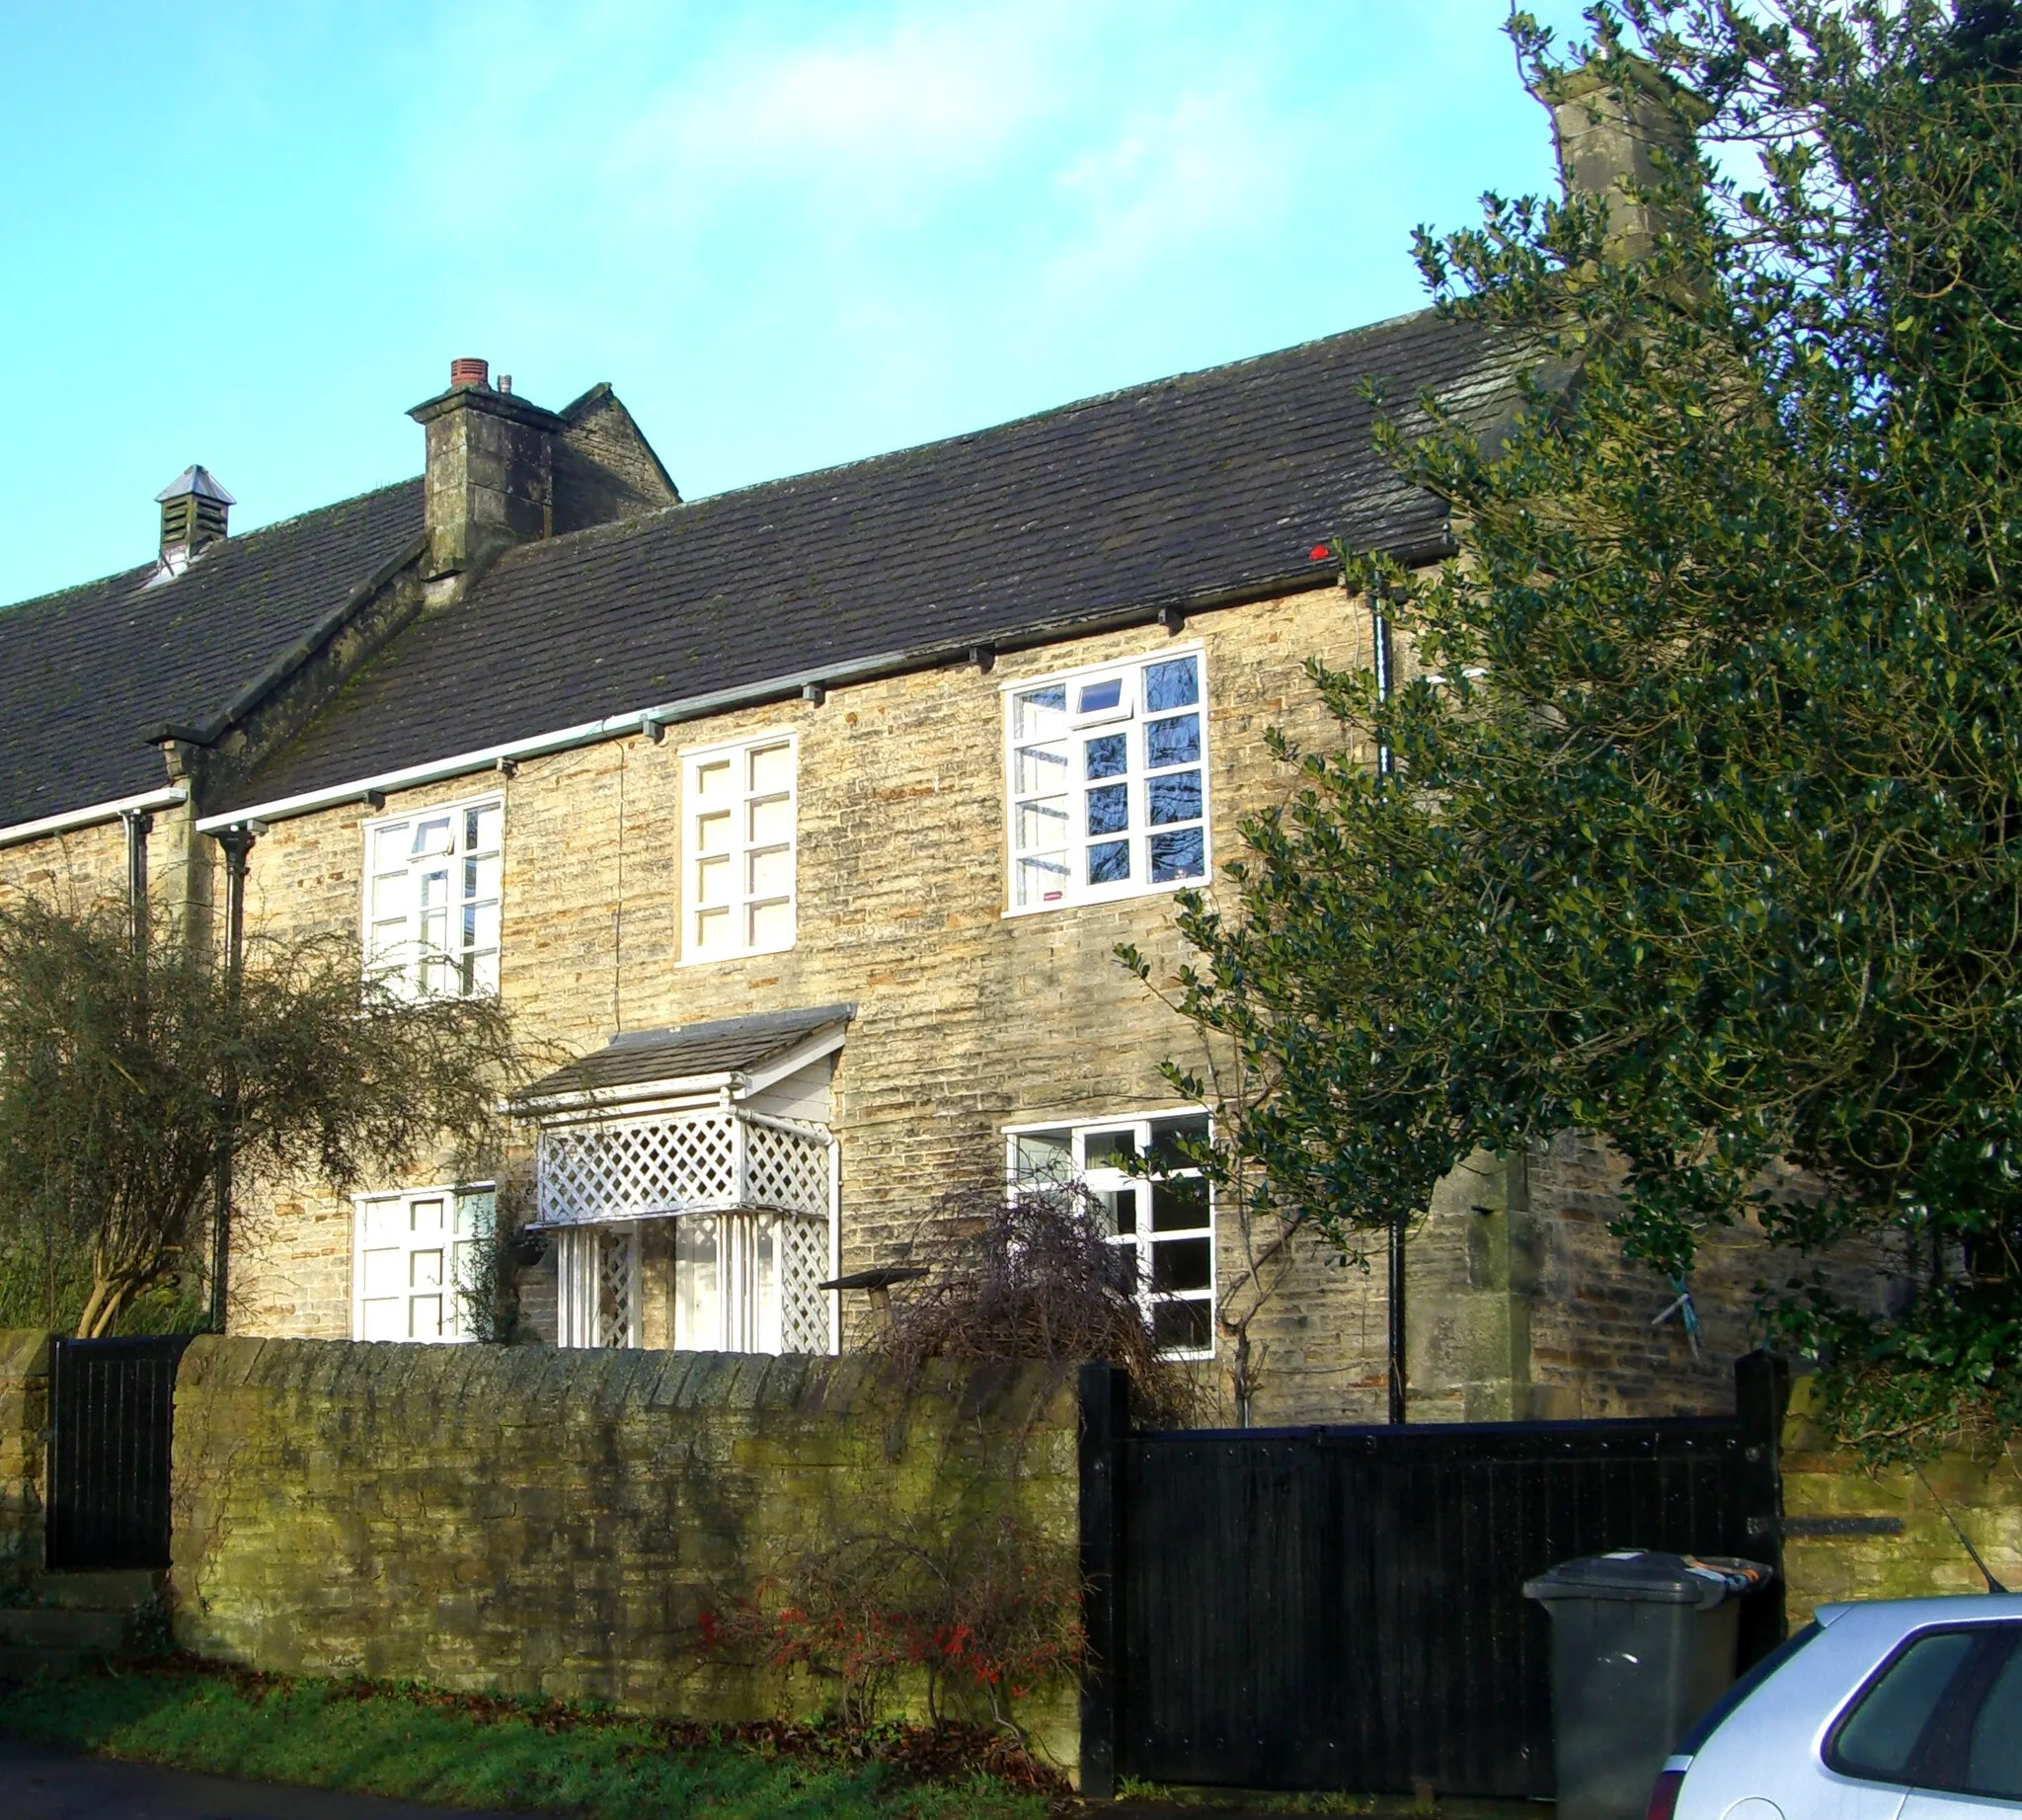 Photo showing: 8 Whiteley Lane in Fulwood, Sheffield, England. This Grade II Listed Building, also known as the Chapel House stands next door to Fulwood Old Chapel, it dates from the mid 18th century.